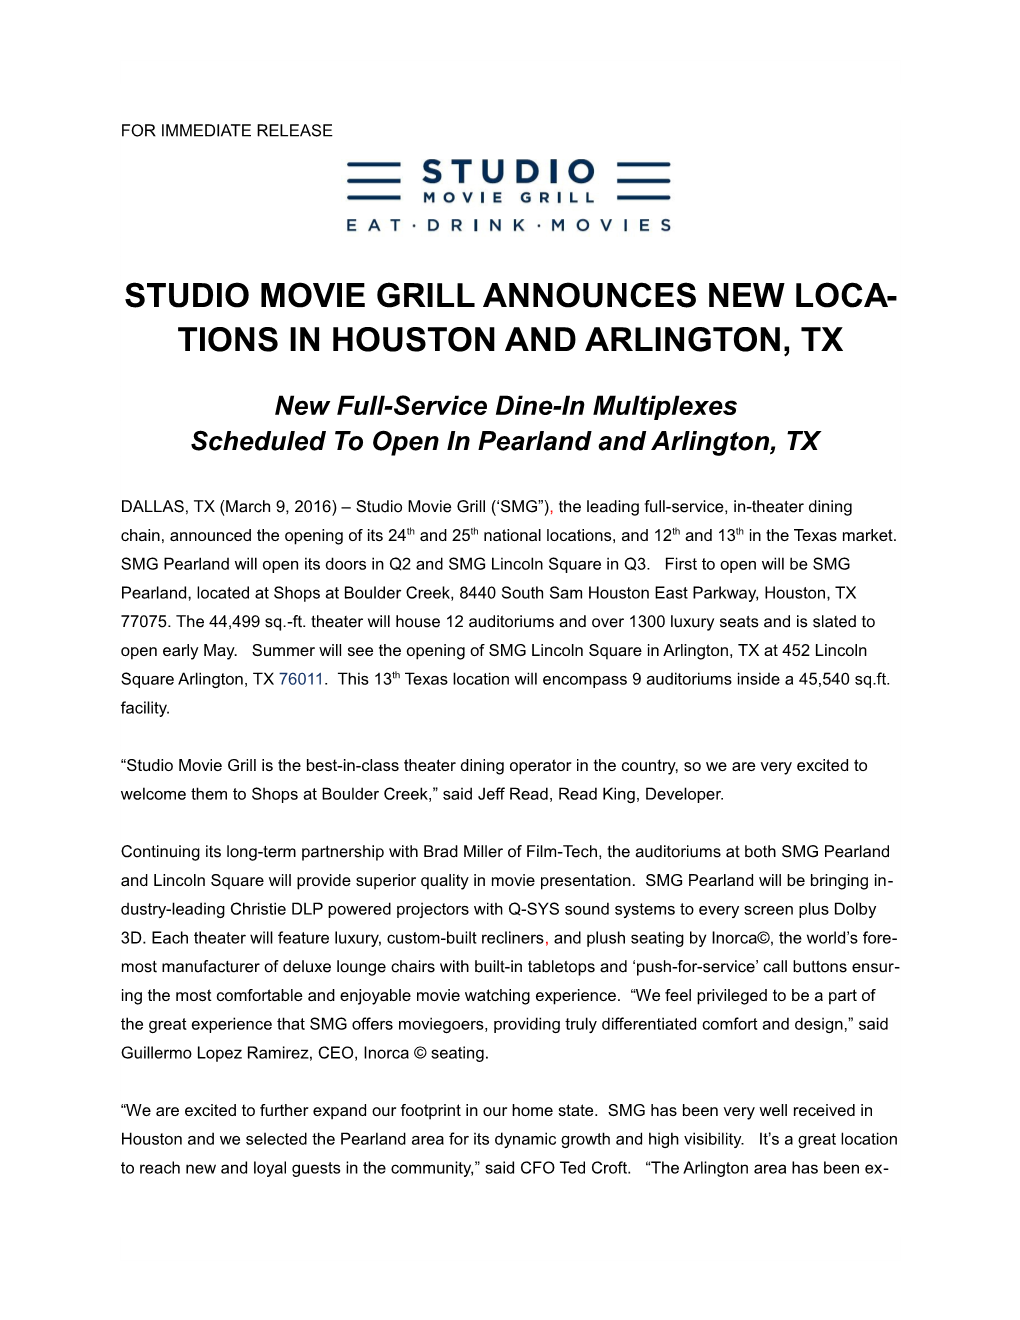 Studio Movie Grill Announces New Locations in Houston and Arlington, TX